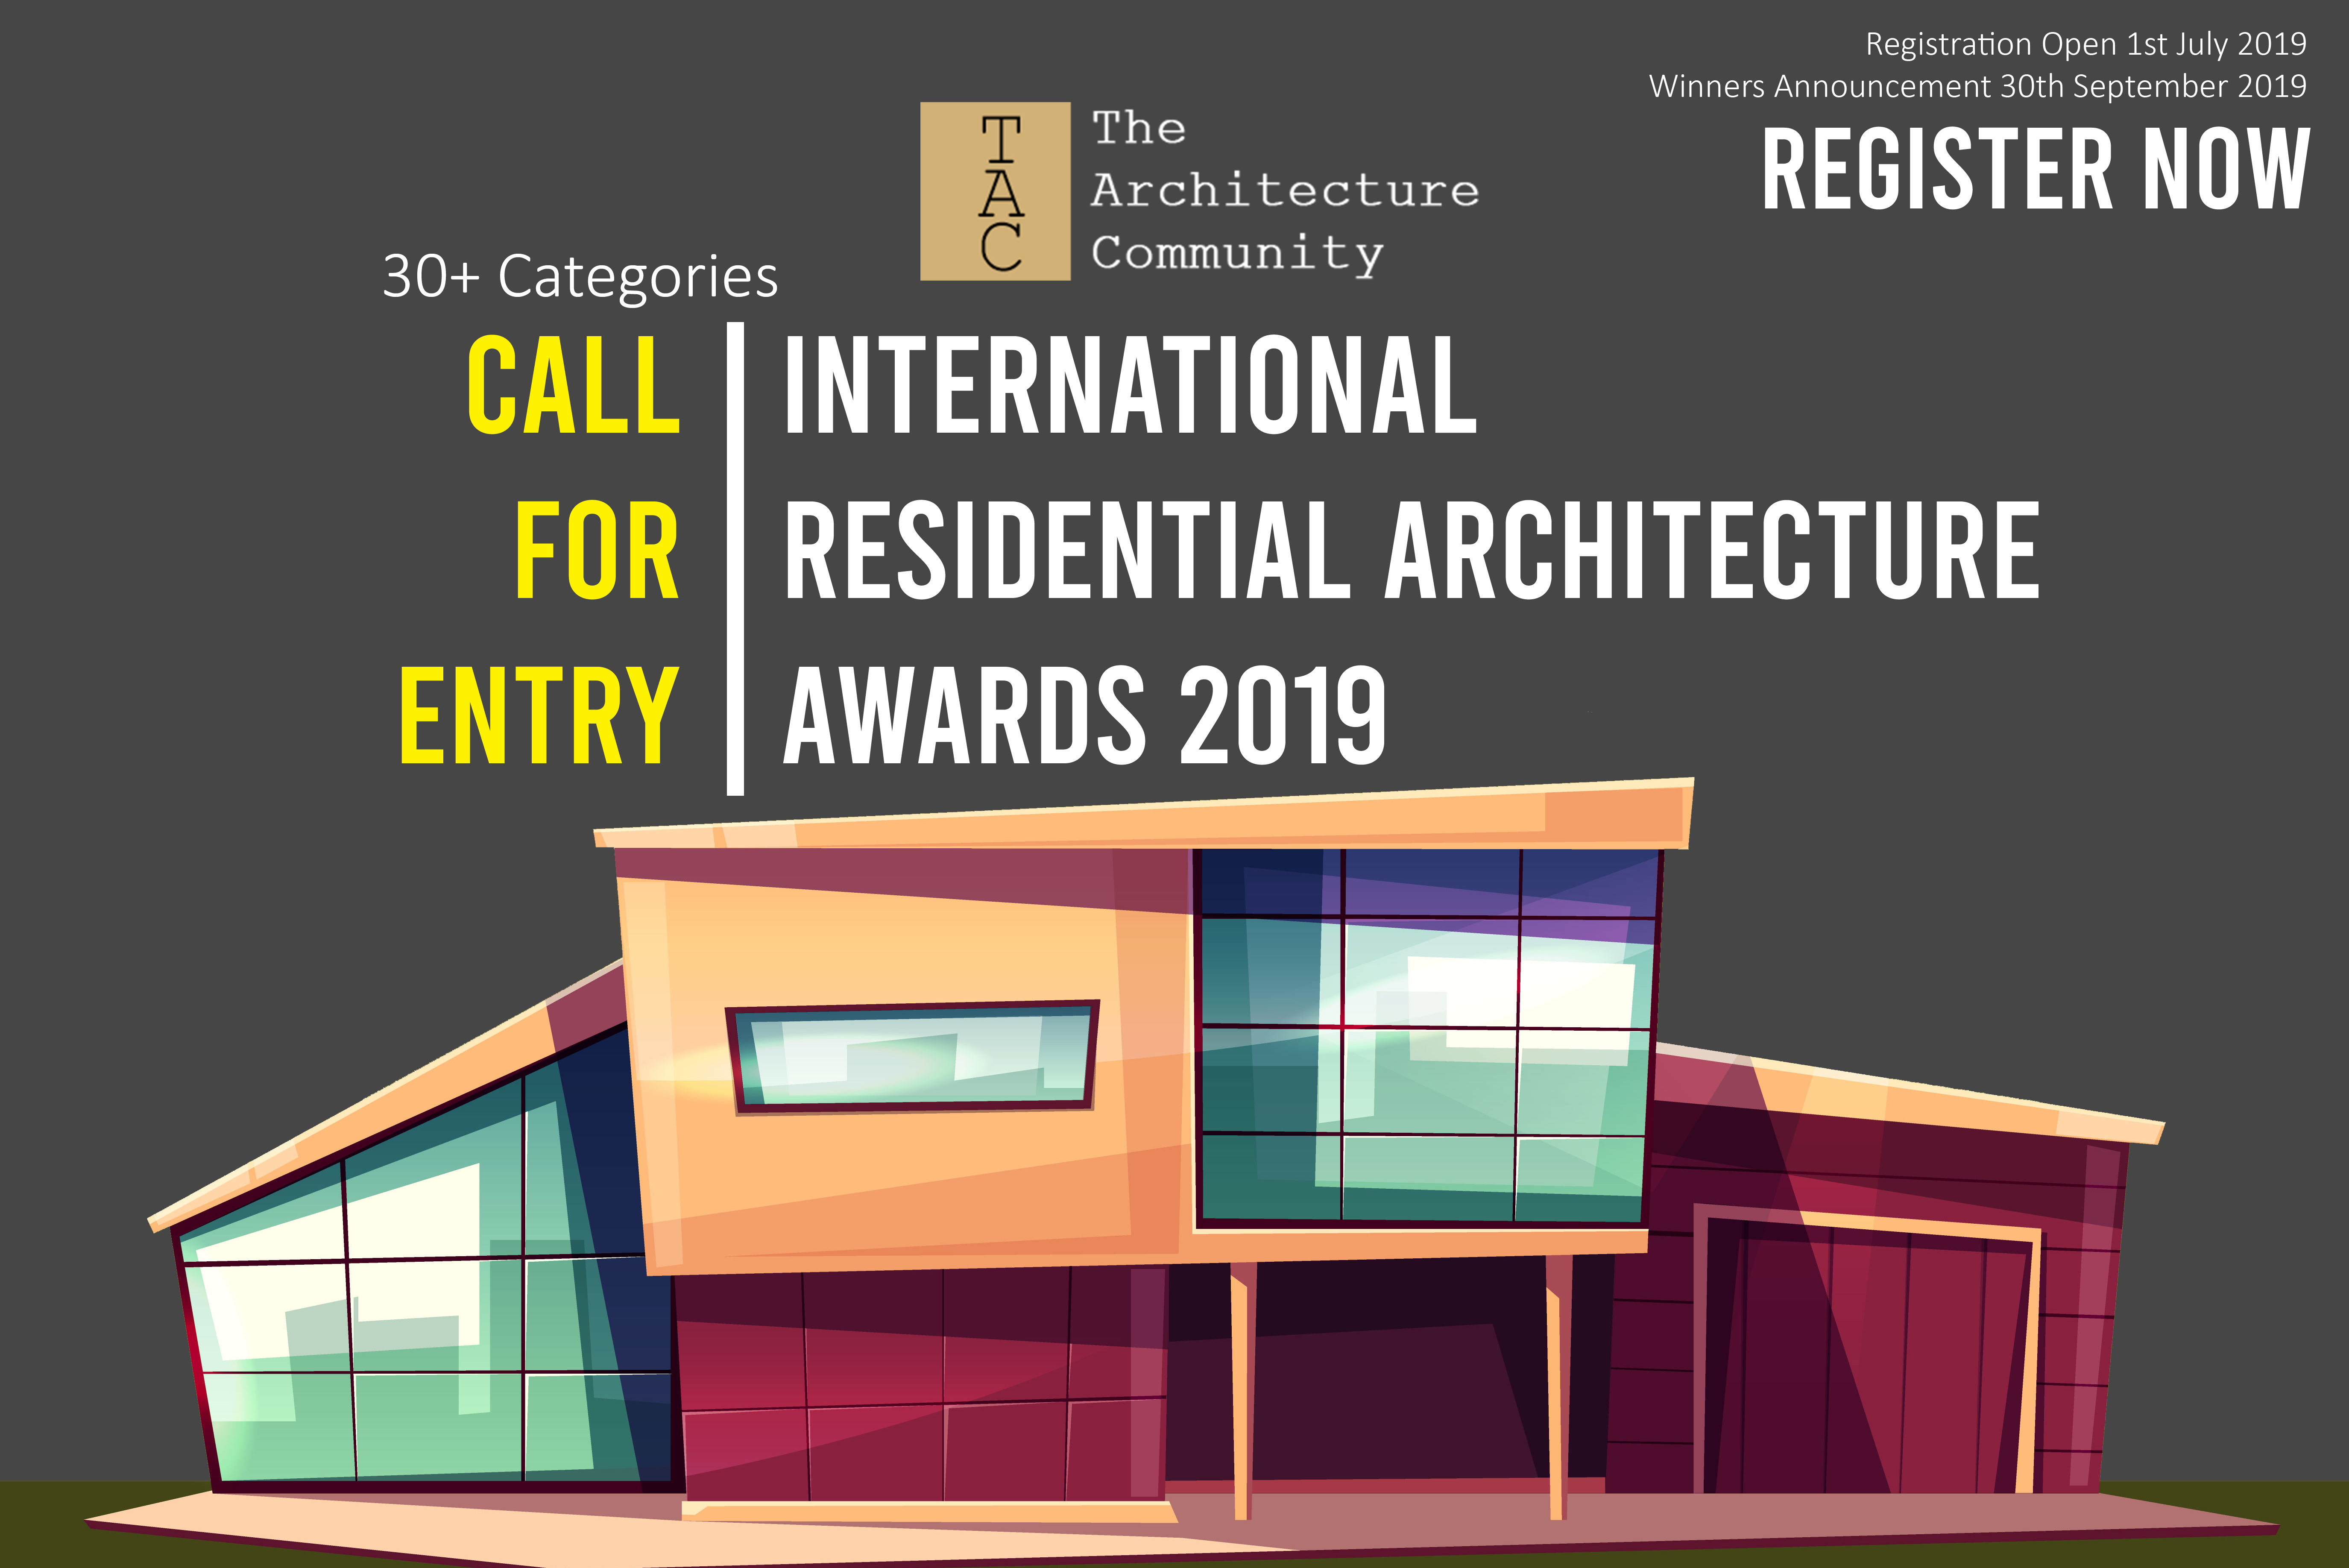 International Residential Architecture Awards 2019